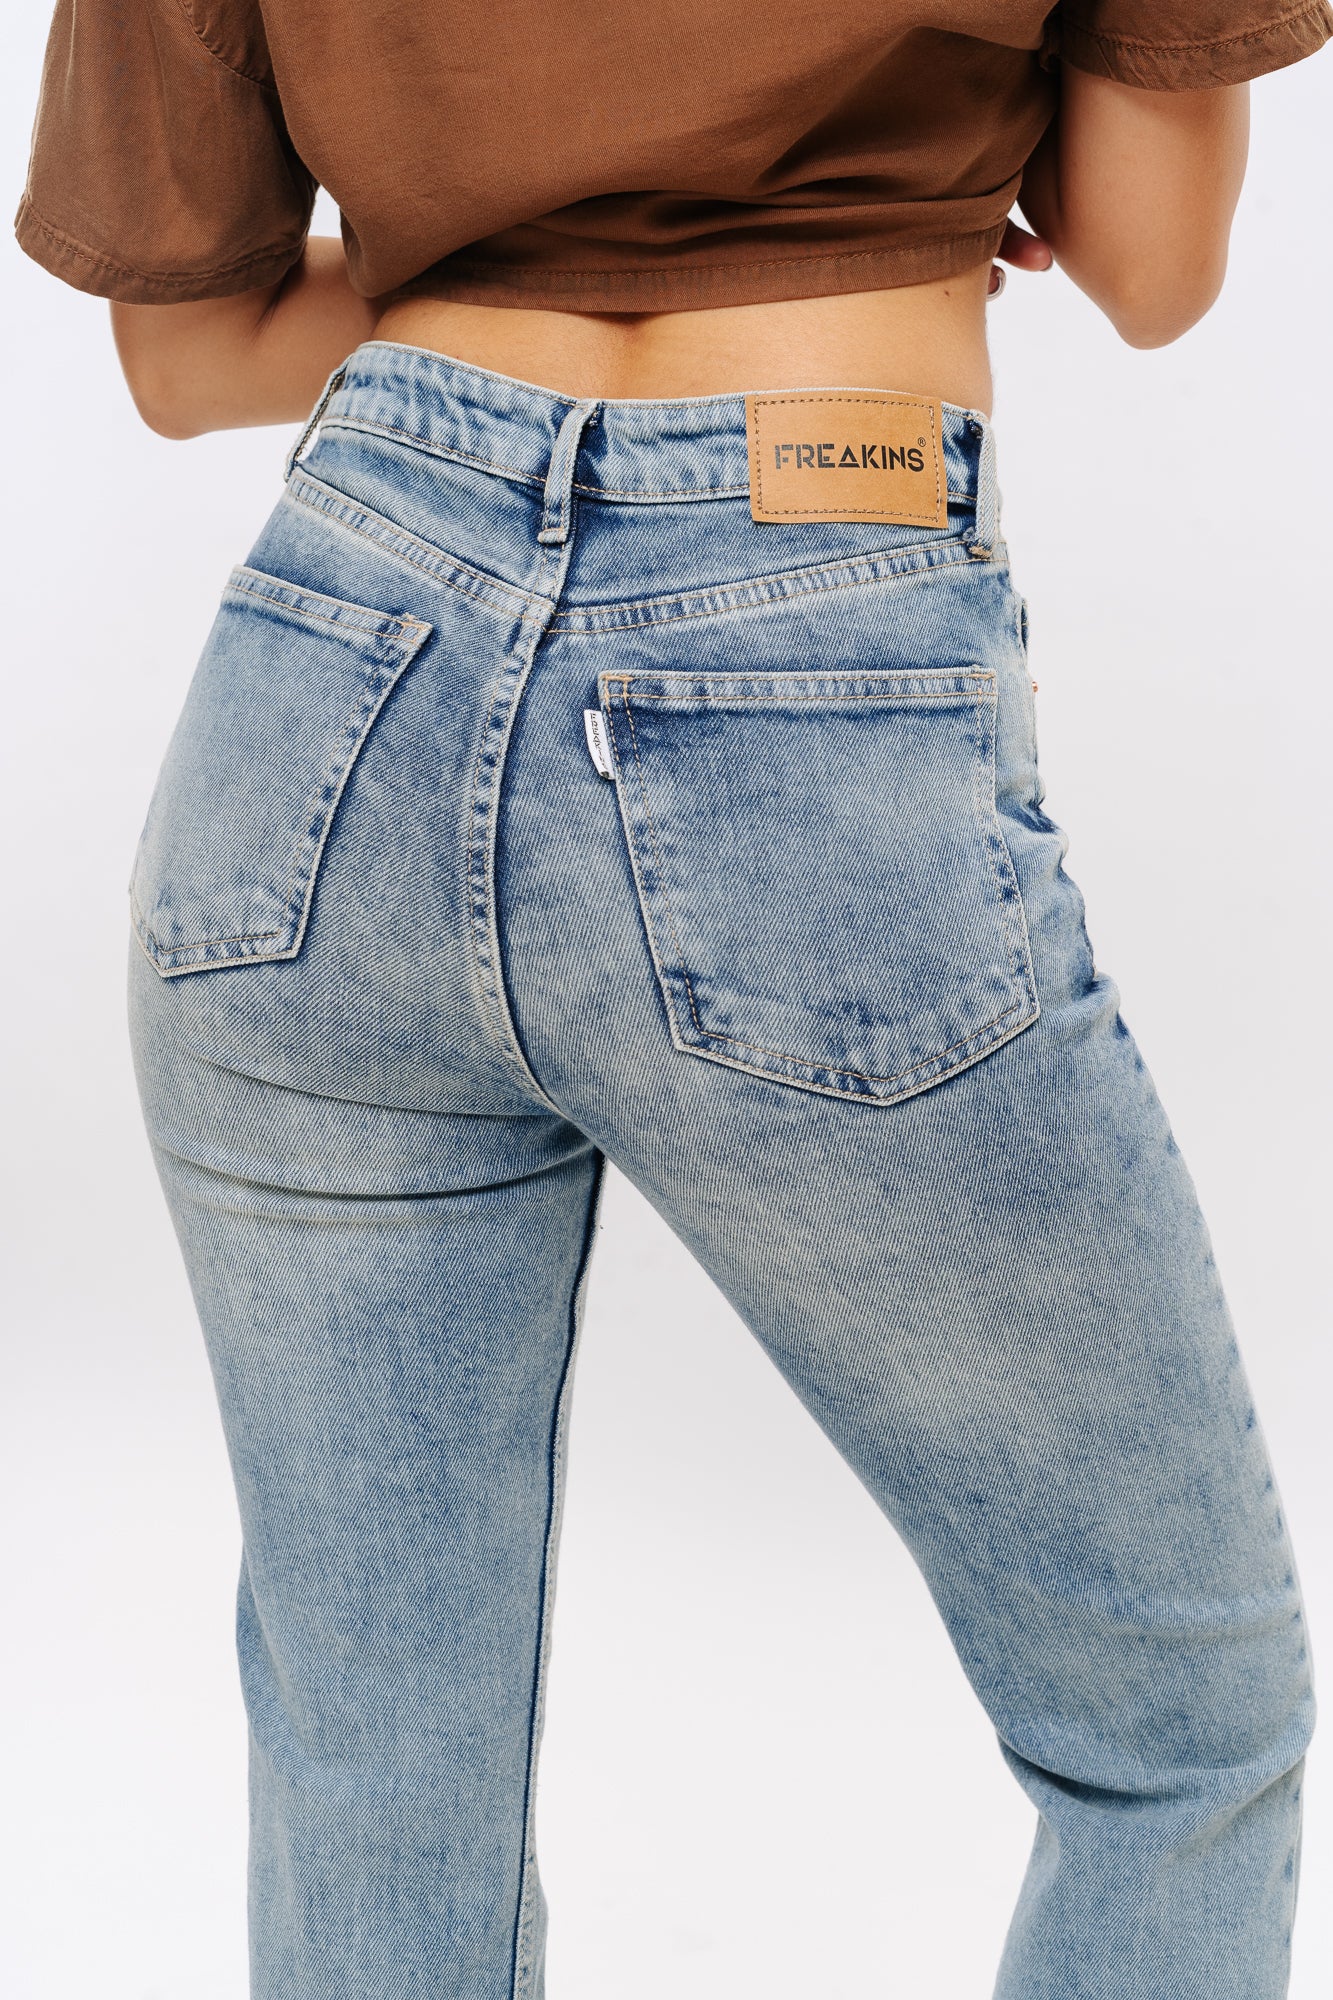 RETRO CROPPED BOOTCUT JEANS